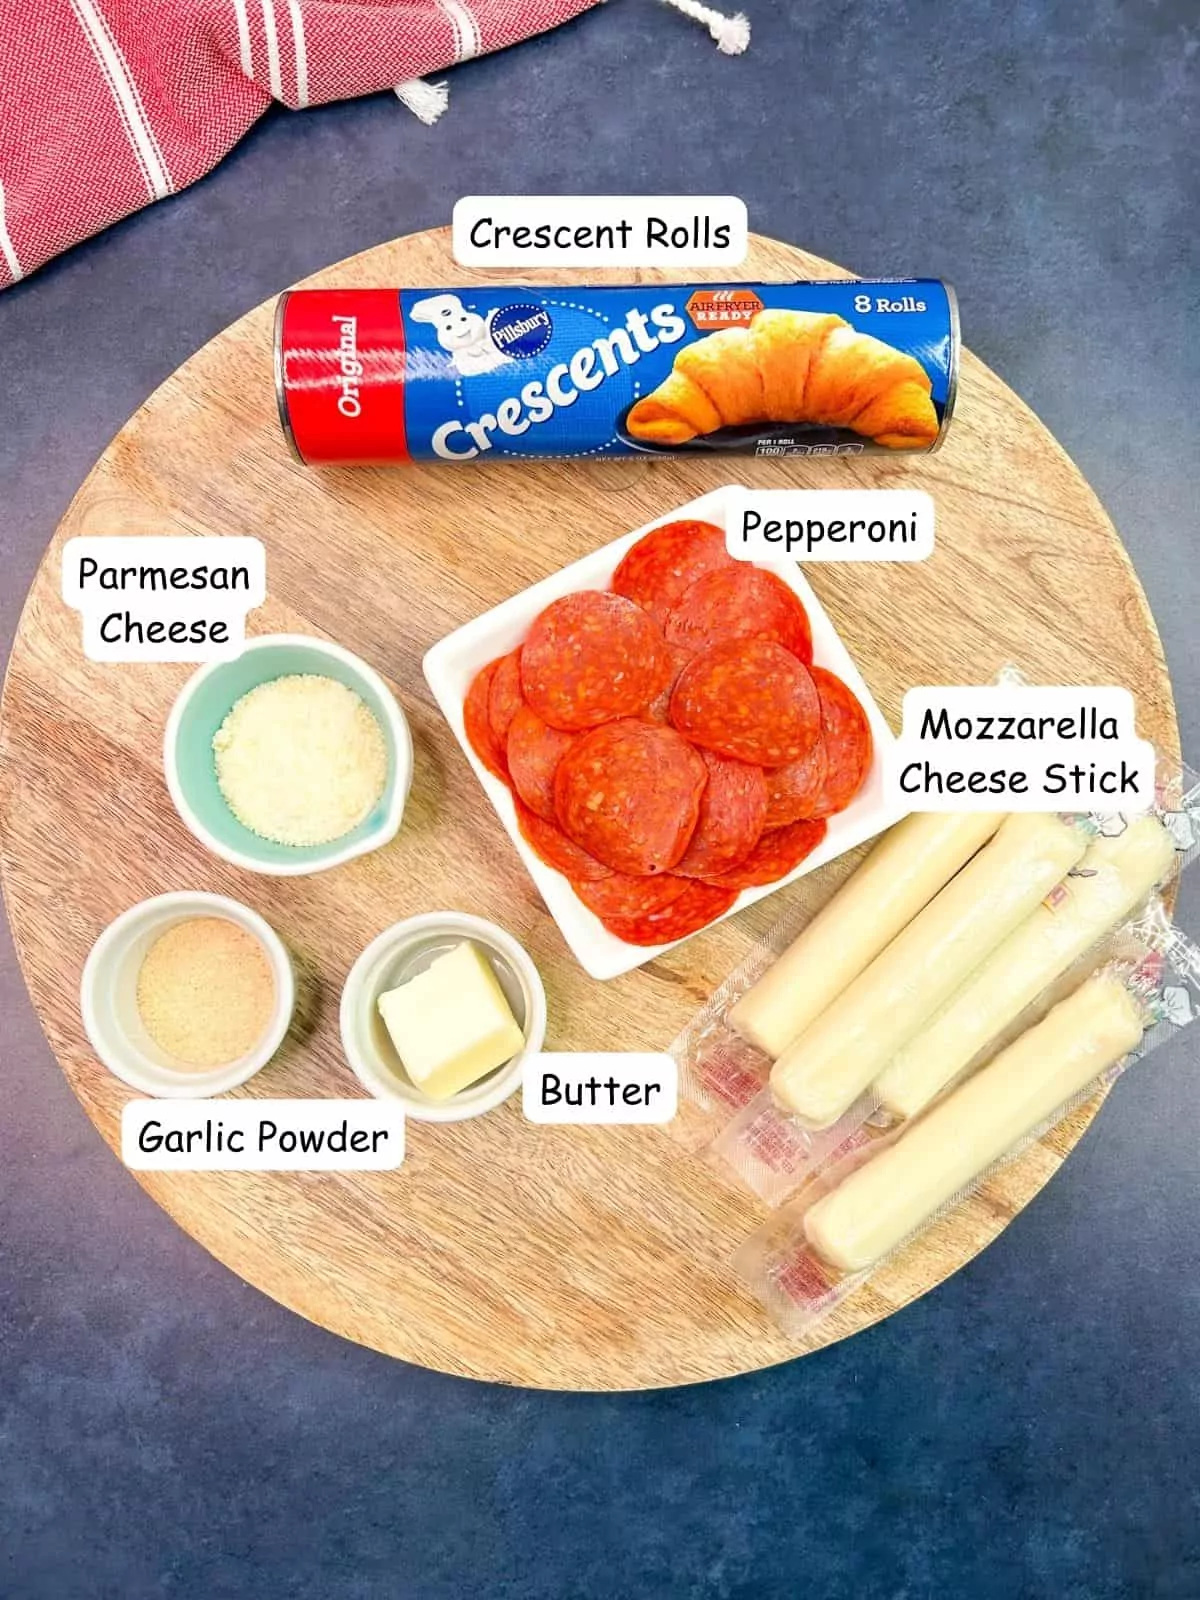 ingredients for pepperoni crescent rolls and cheese.